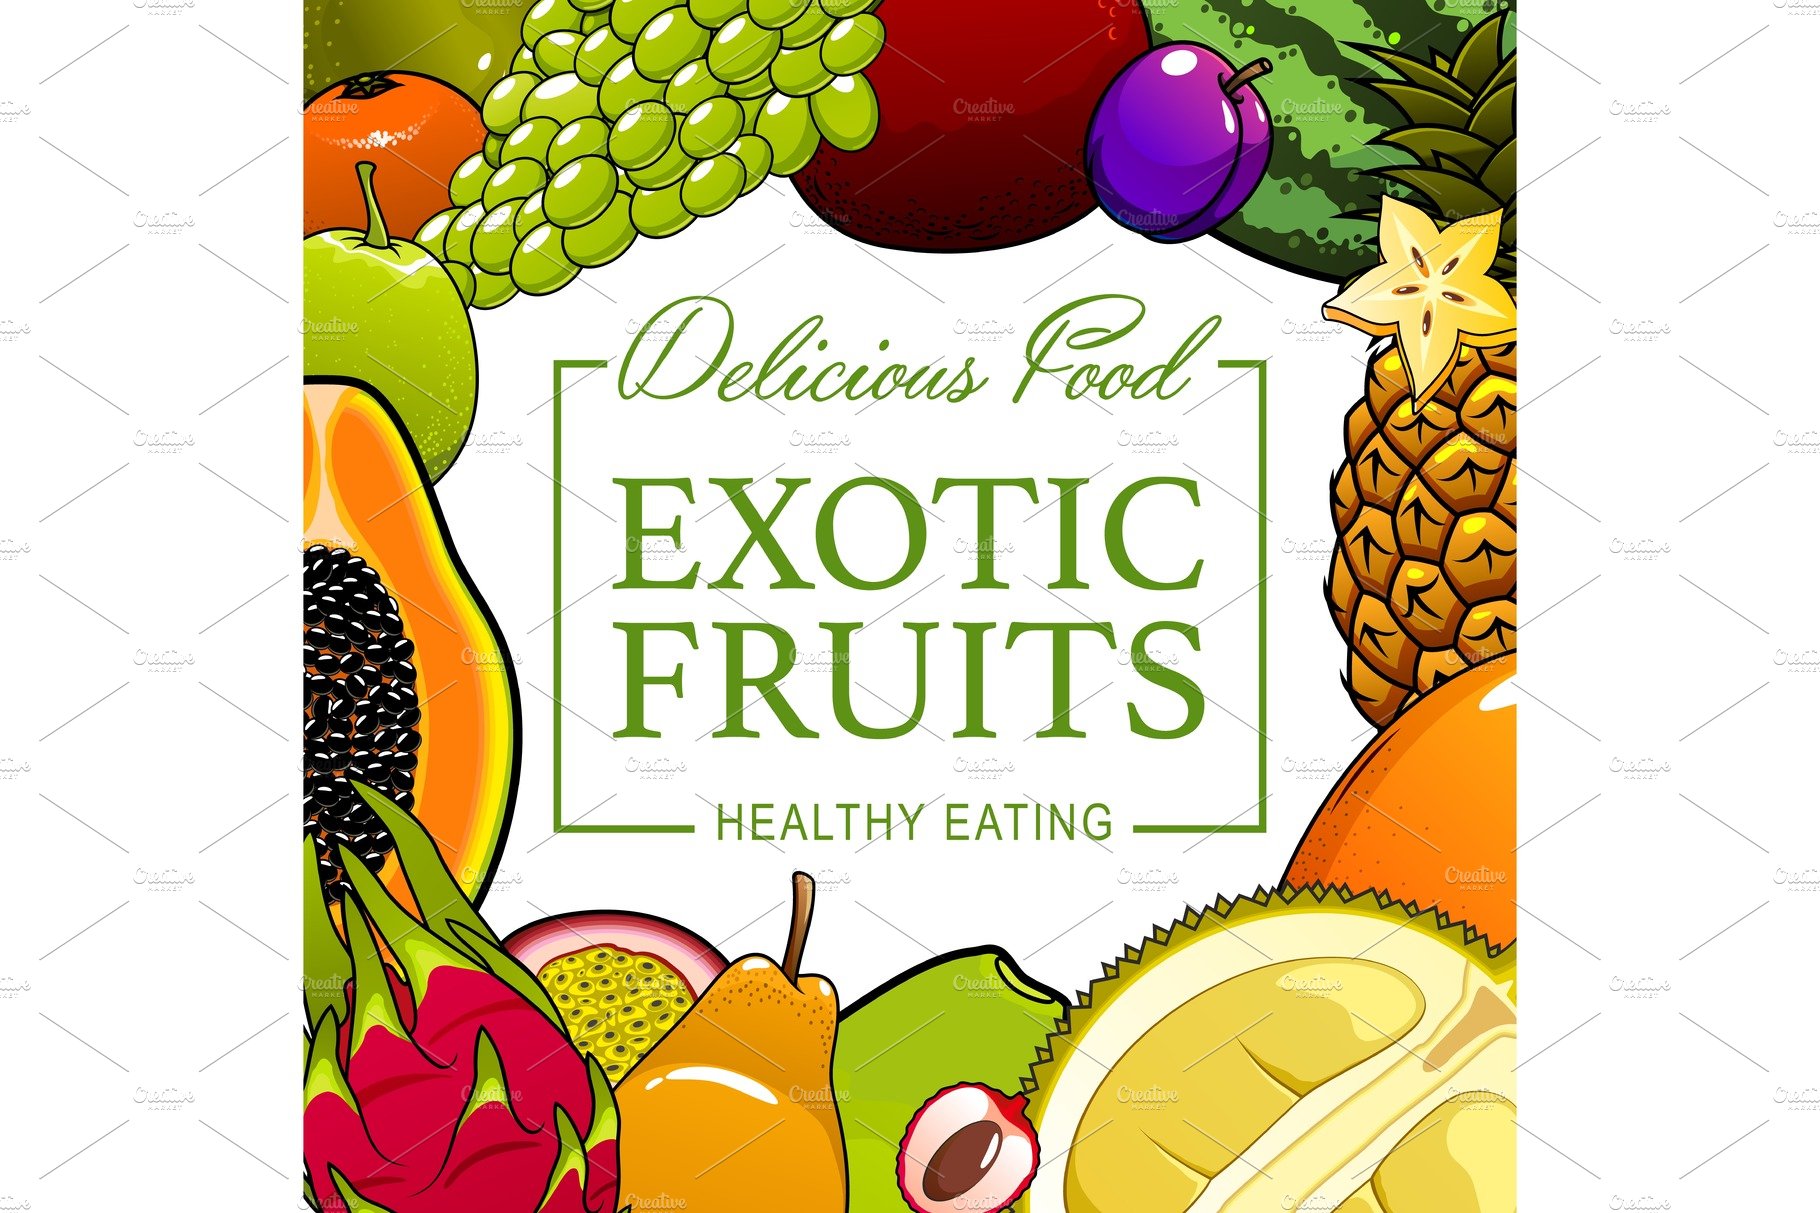 Tropical fruits cover image.